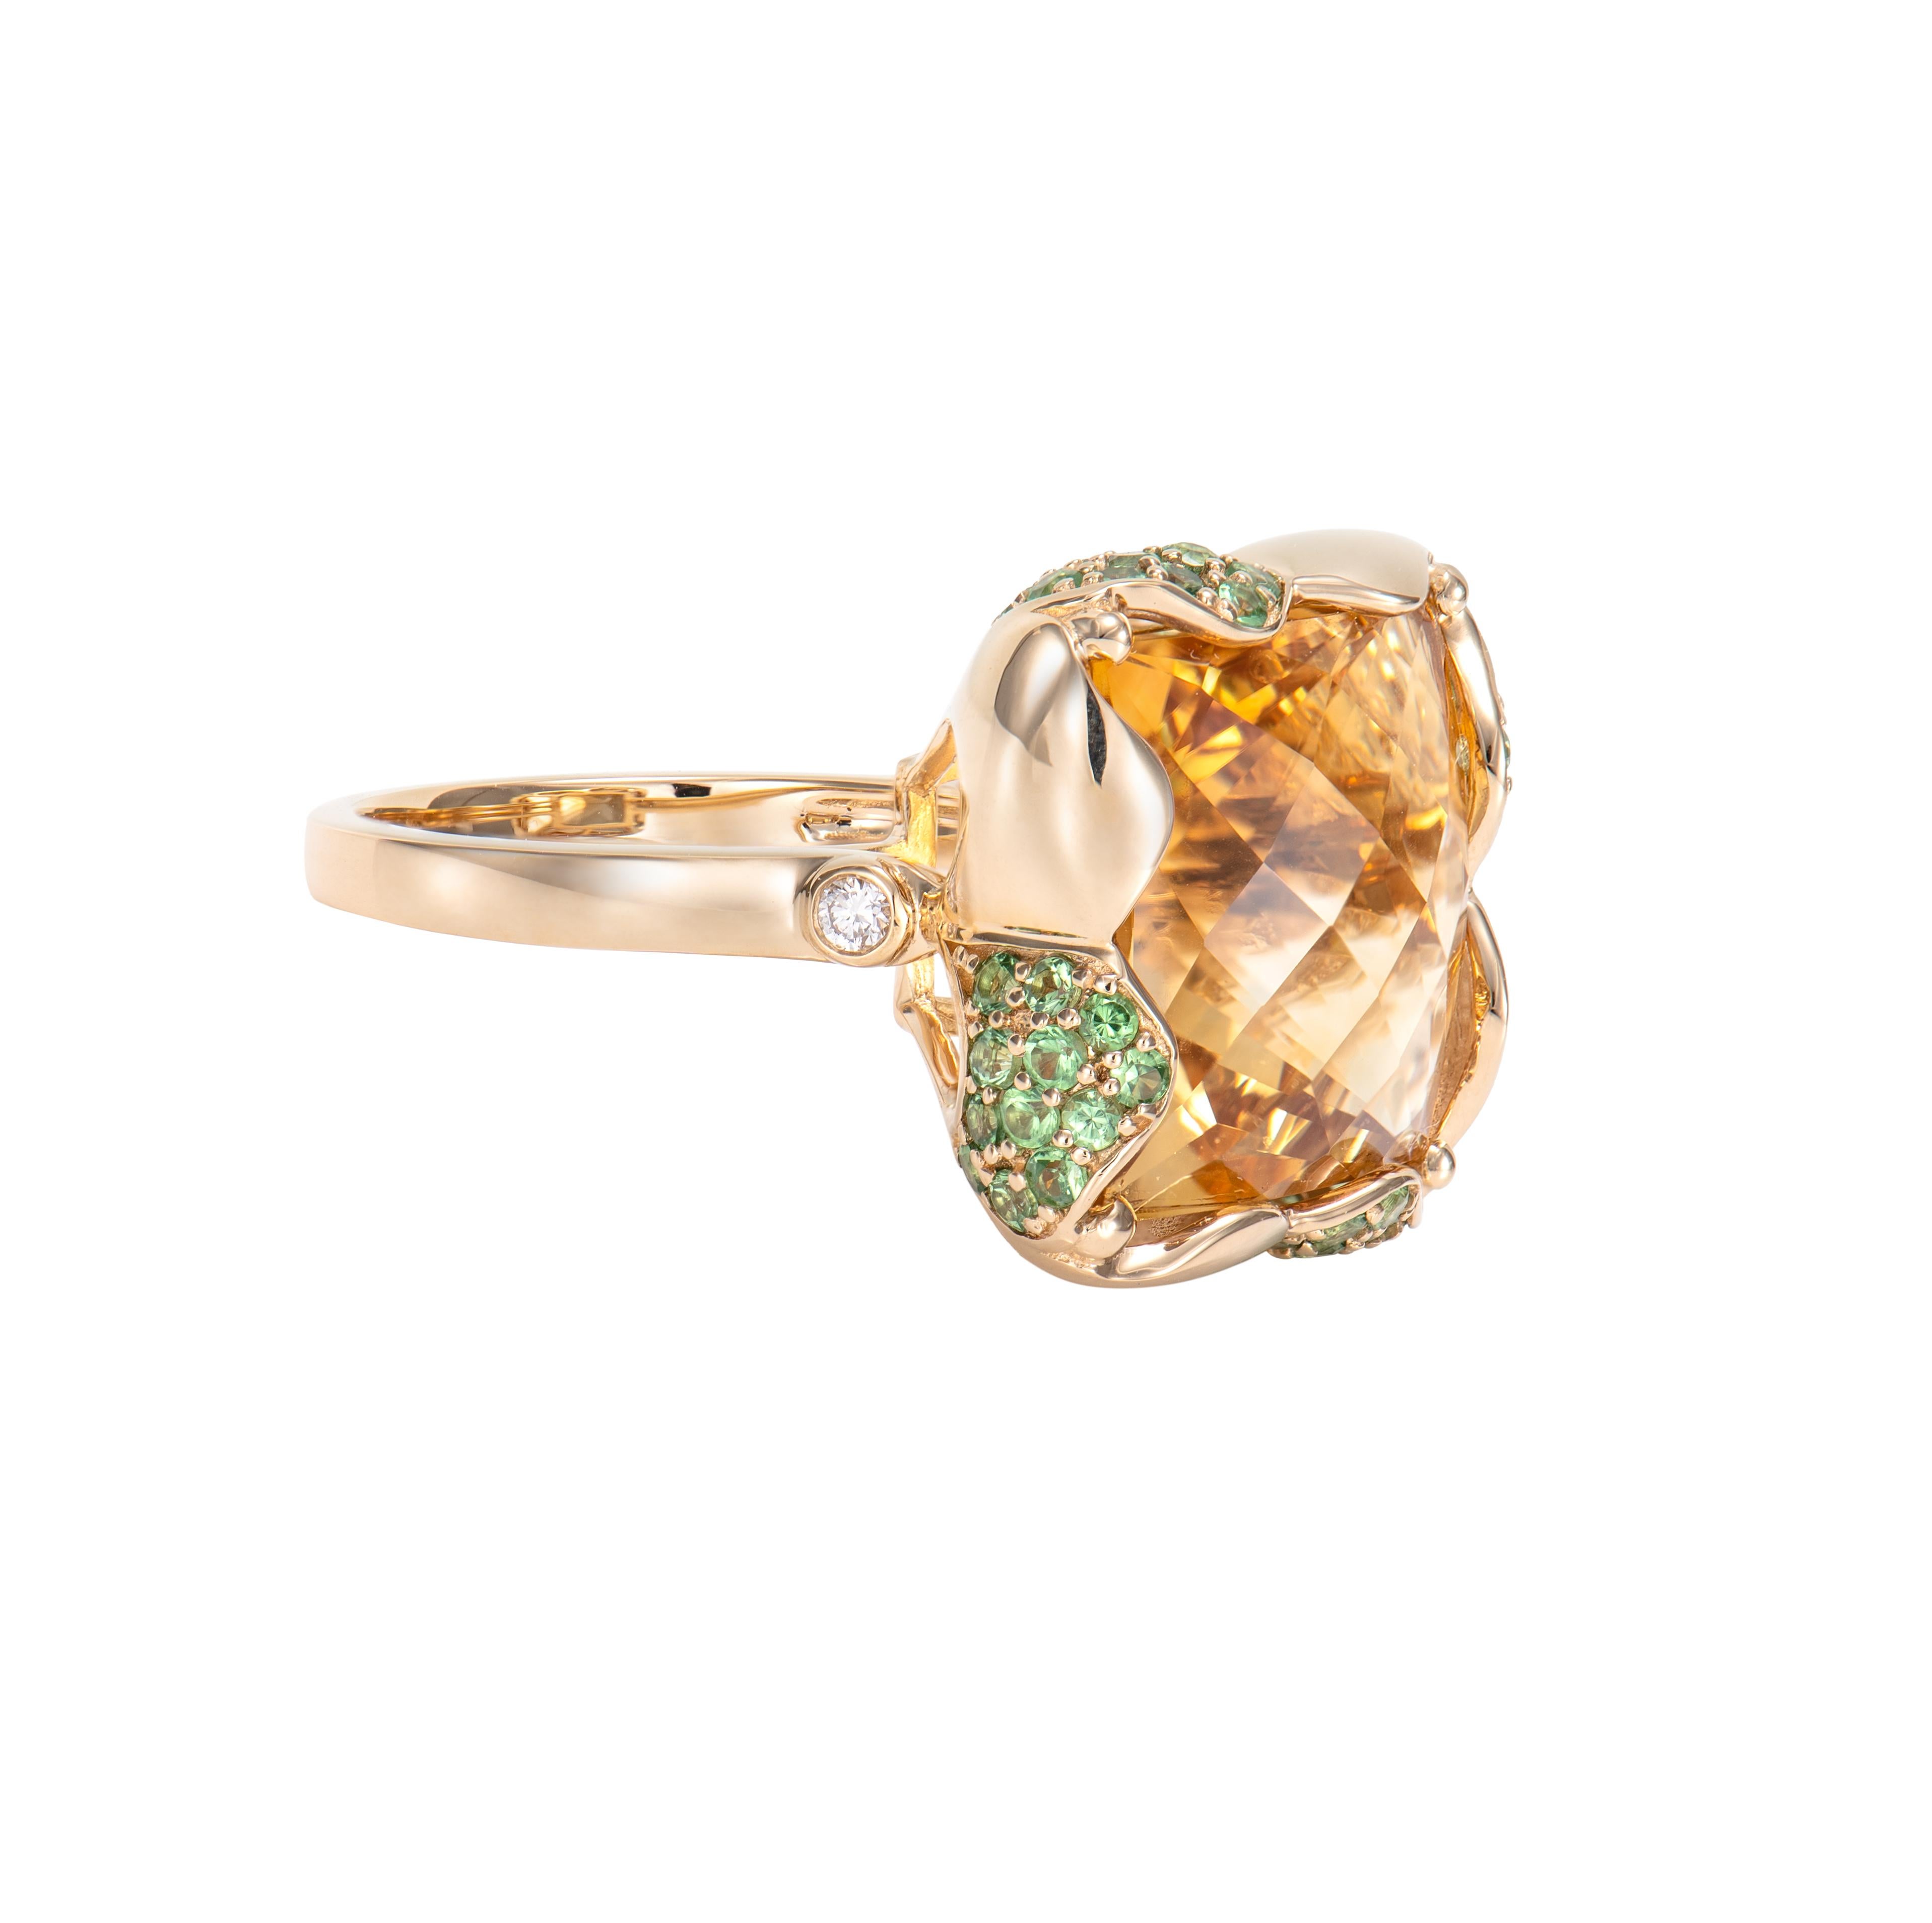 It is fancy Citrine Ring in a Square shape with checkerboard cut with yellow hue. The ring is elegant and can be worn for many occasions. The Tsavorite around the ring add to the beauty and elegance of the ring. These beautiful gems make great gifts